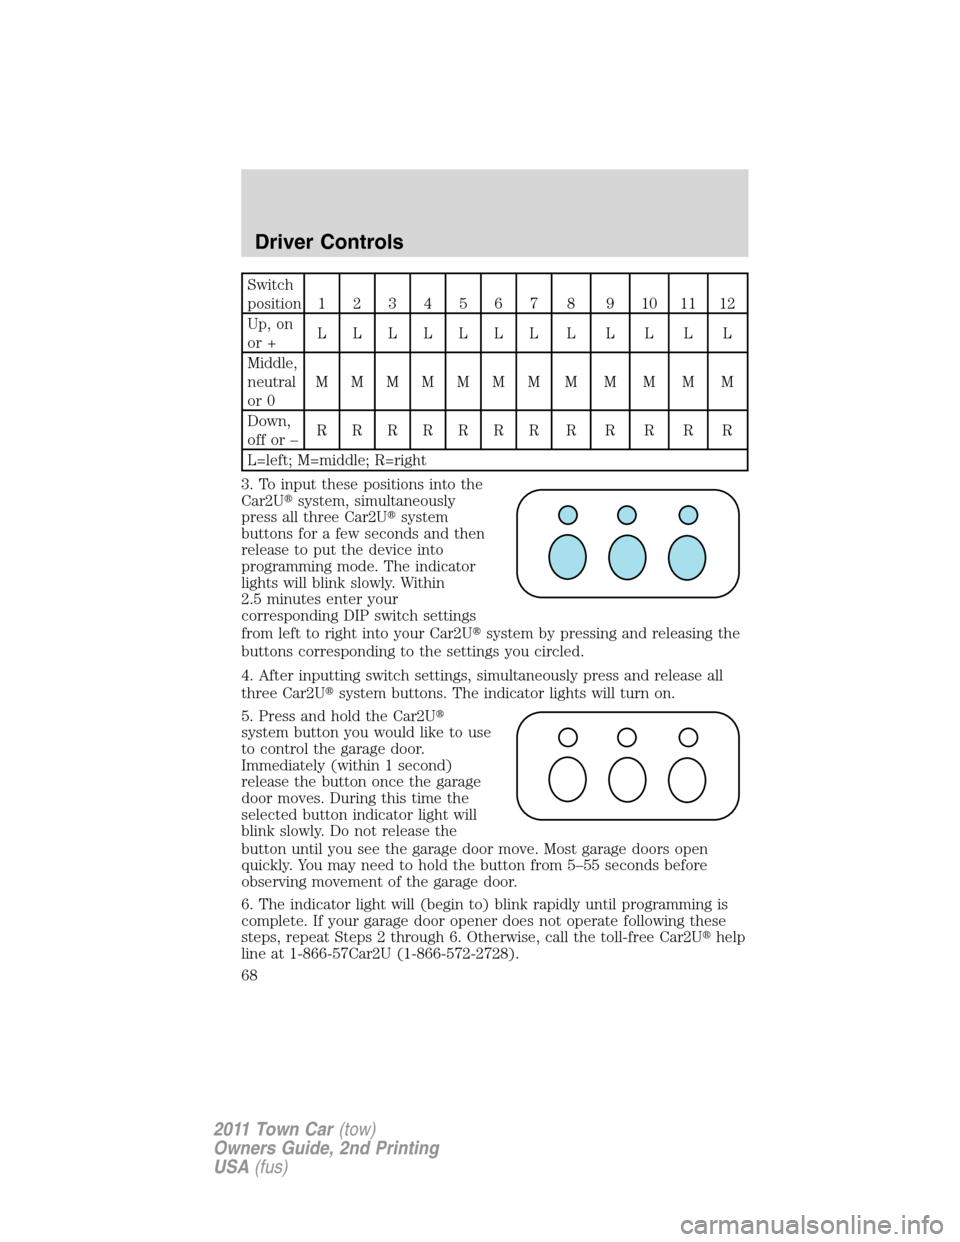 LINCOLN TOWN CAR 2011  Owners Manual Switch
position1234567 8 9101112
Up, on
or +LLLLLLLLLLLL
Middle,
neutral
or 0MMMMMMMMMMMM
Down,
offor–RRRRRRRRRRRR
L=left; M=middle; R=right
3. To input these positions into the
Car2Usystem, simult